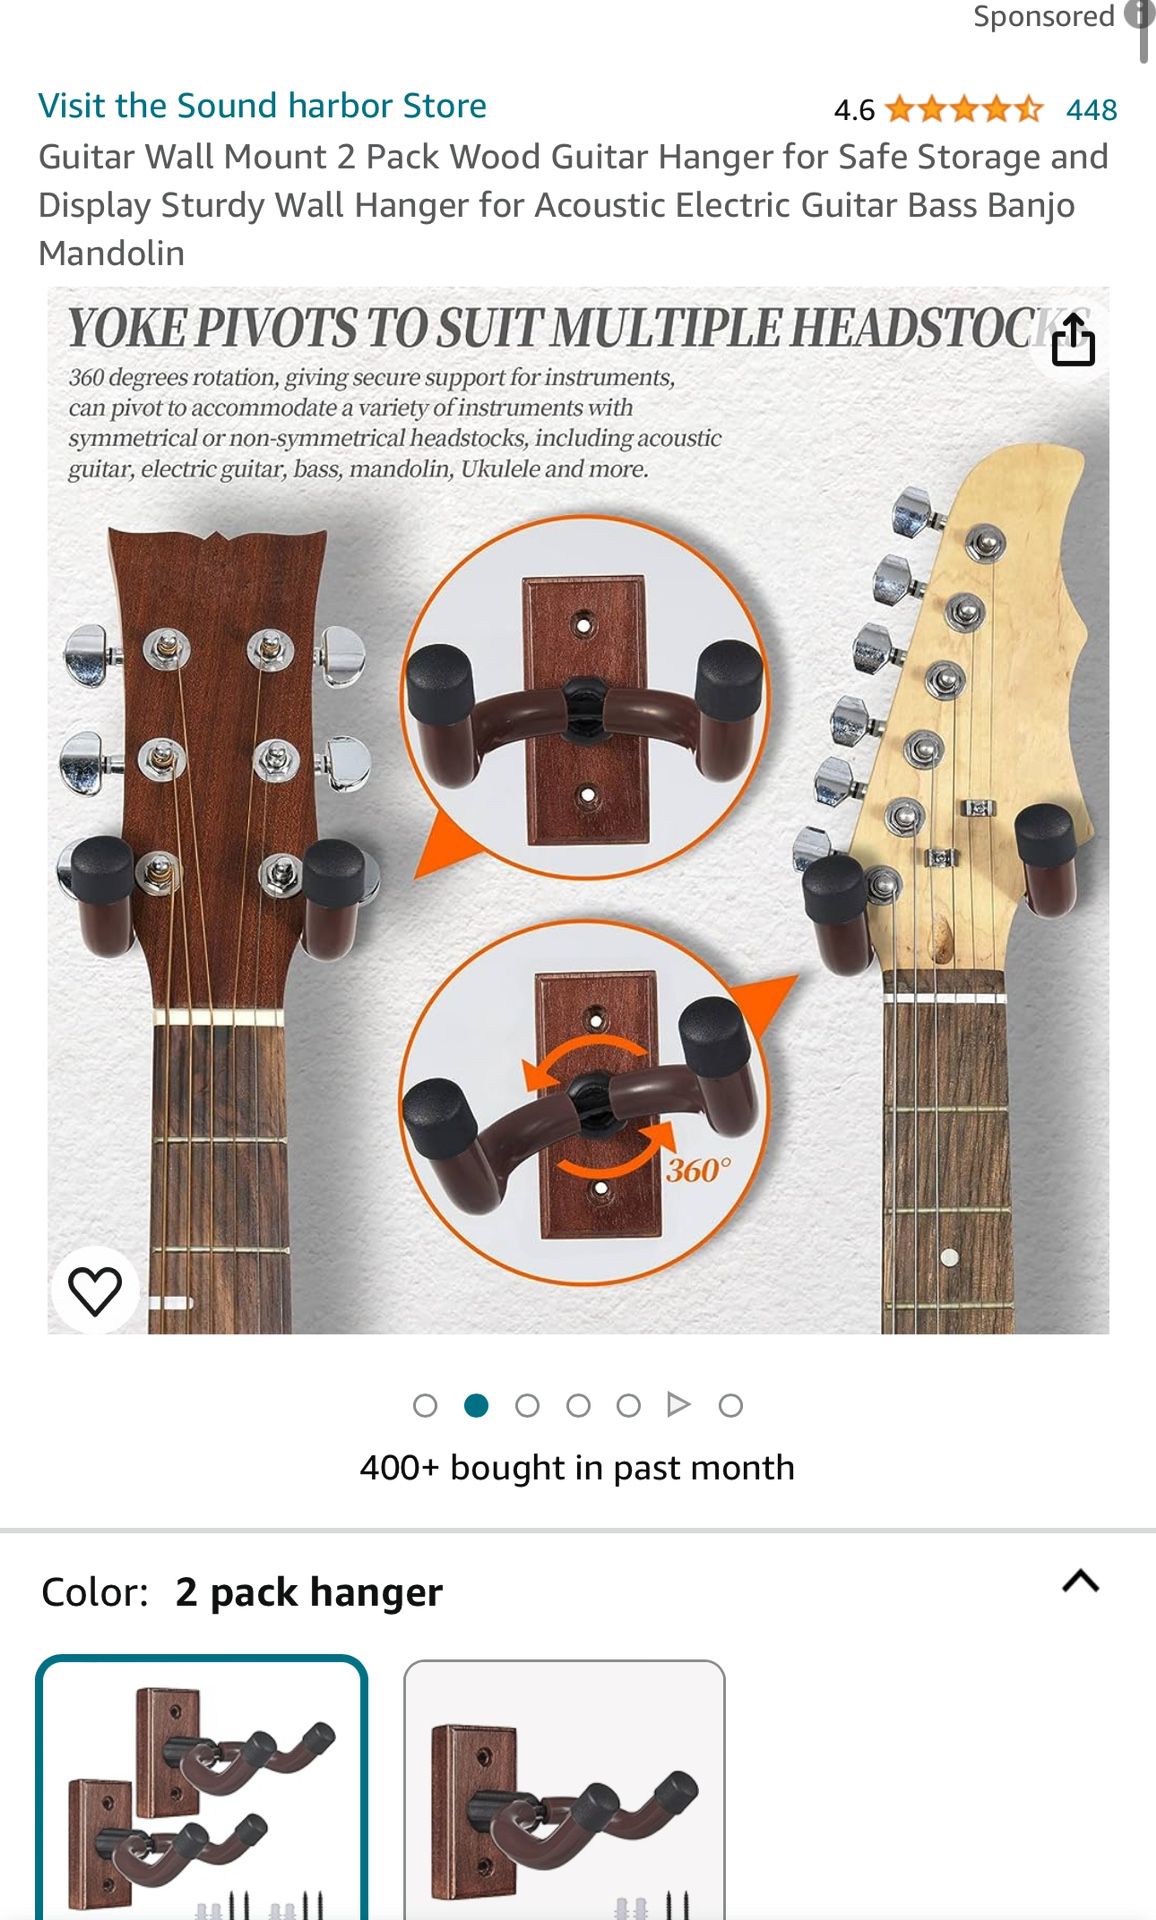 Guitar Wall Mount 3Pack Wood Guitar Hanger for Safe Storage and Display Sturdy Wall Hanger for Acoustic Electric Guitar Bass Banjo Mandolin